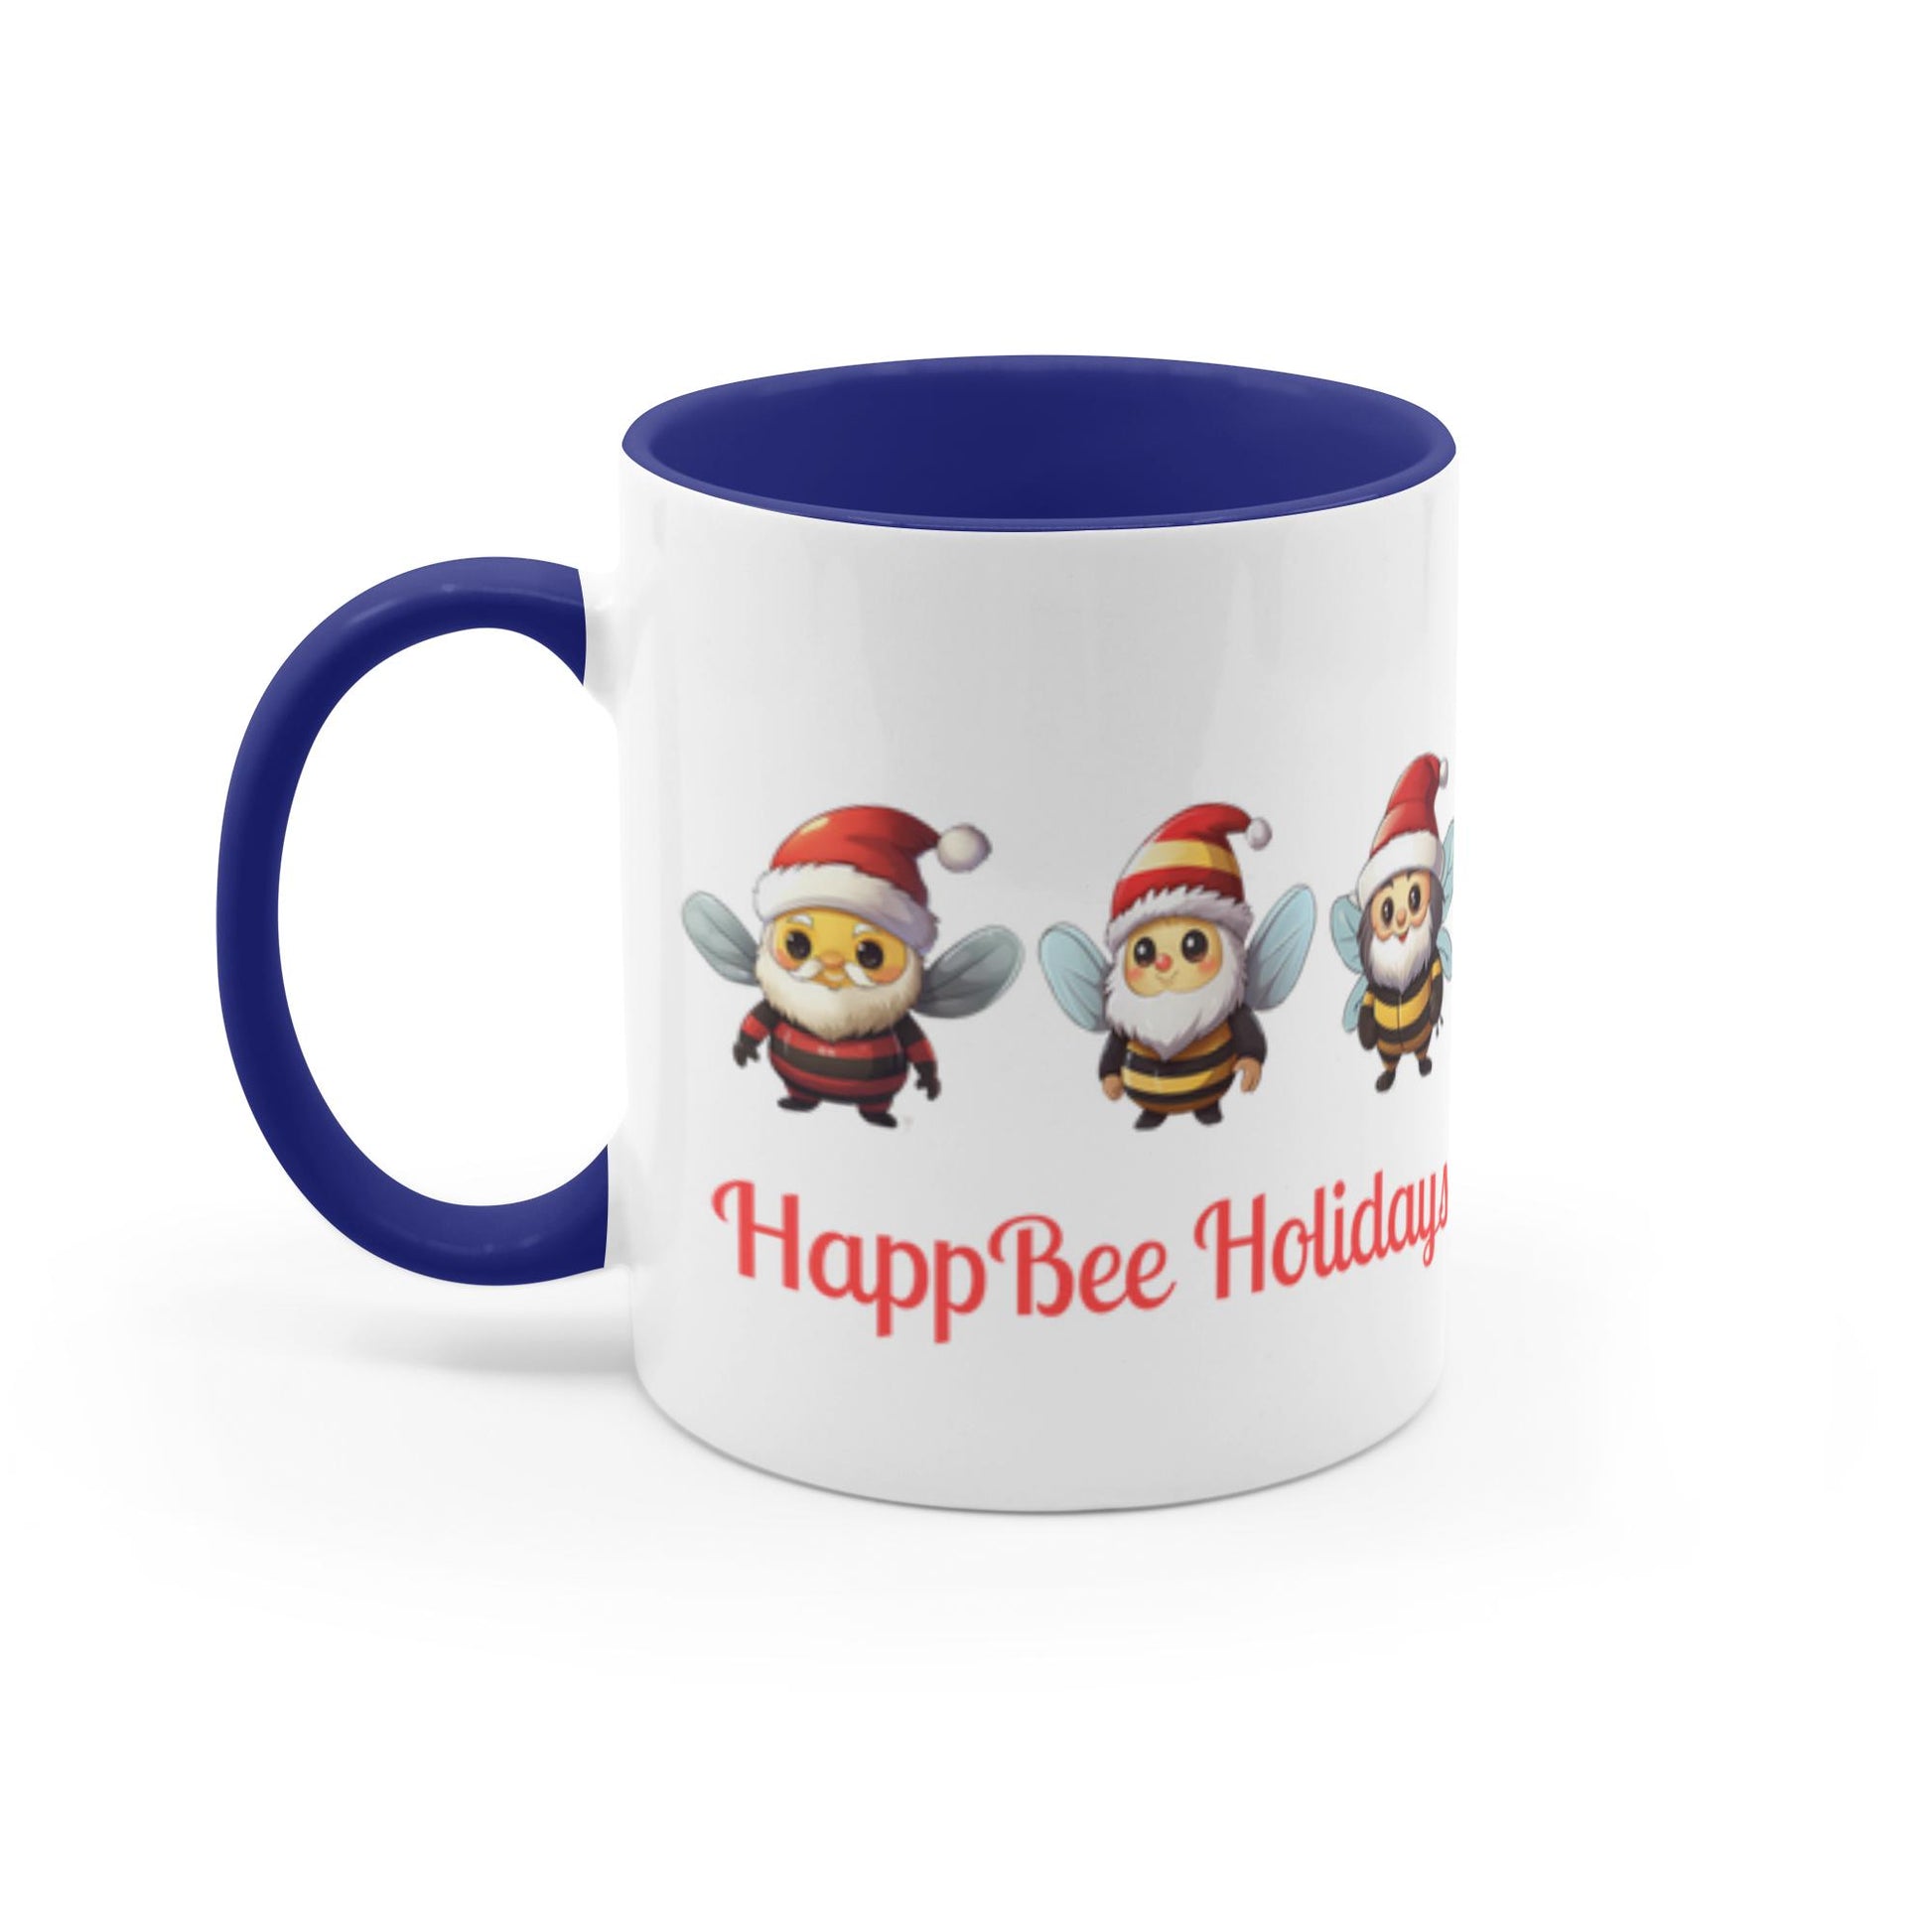 HappBee Holidays 11 oz. Accent Mug 11 oz White With Dark Blue Accents Coffee & Tea Cups gifts holiday store